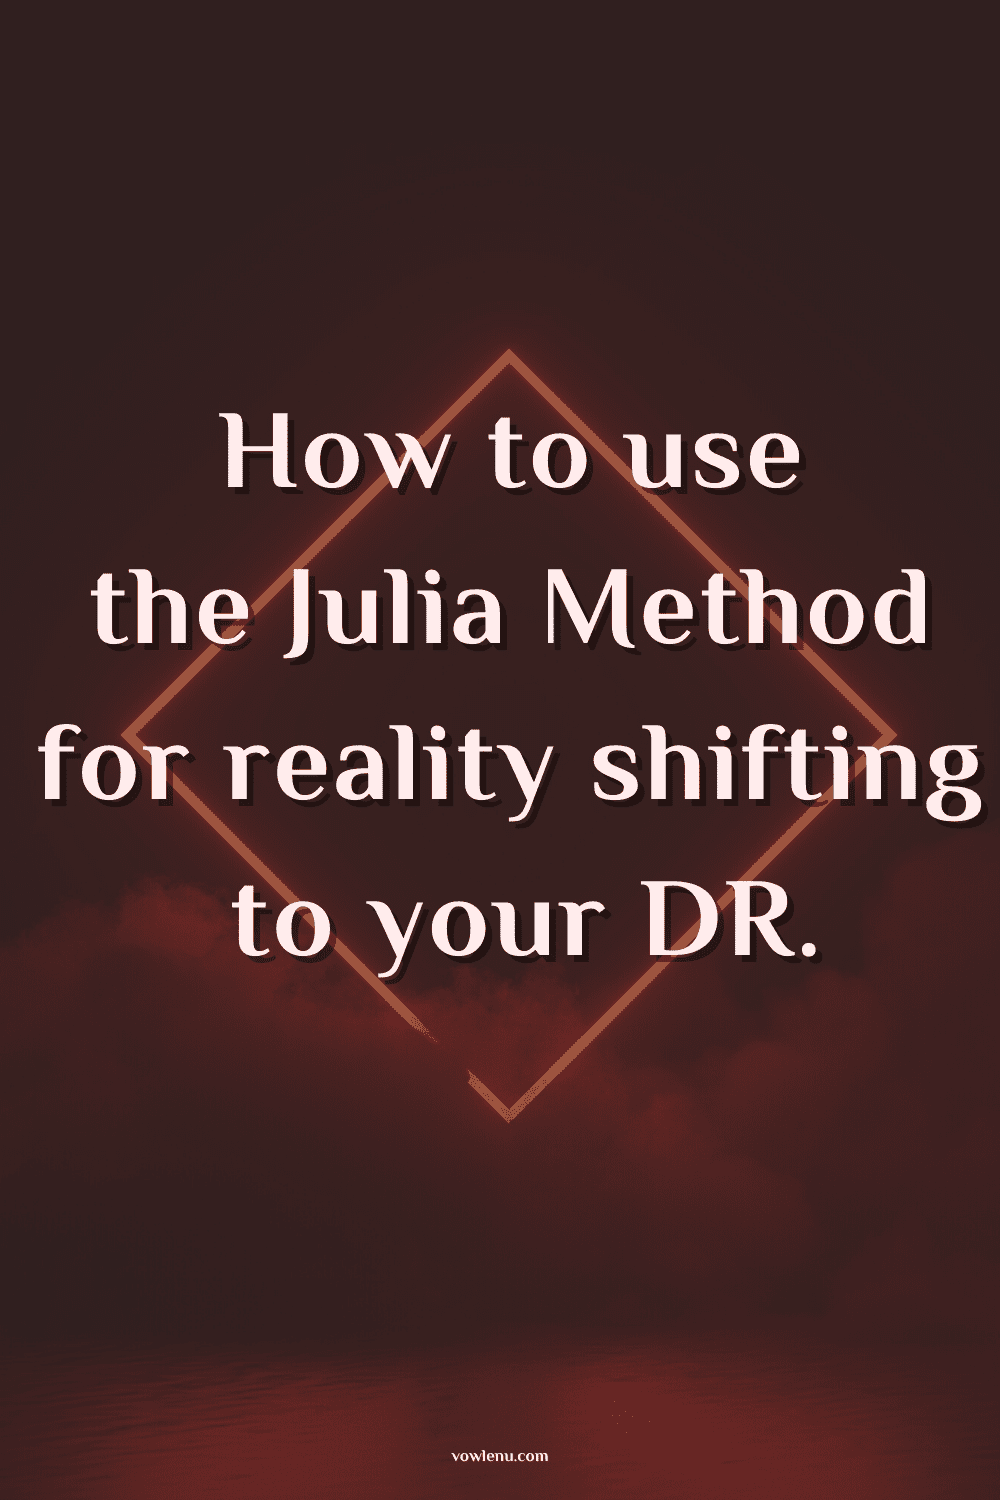 How to use the Julia Method for reality shifting to your DR